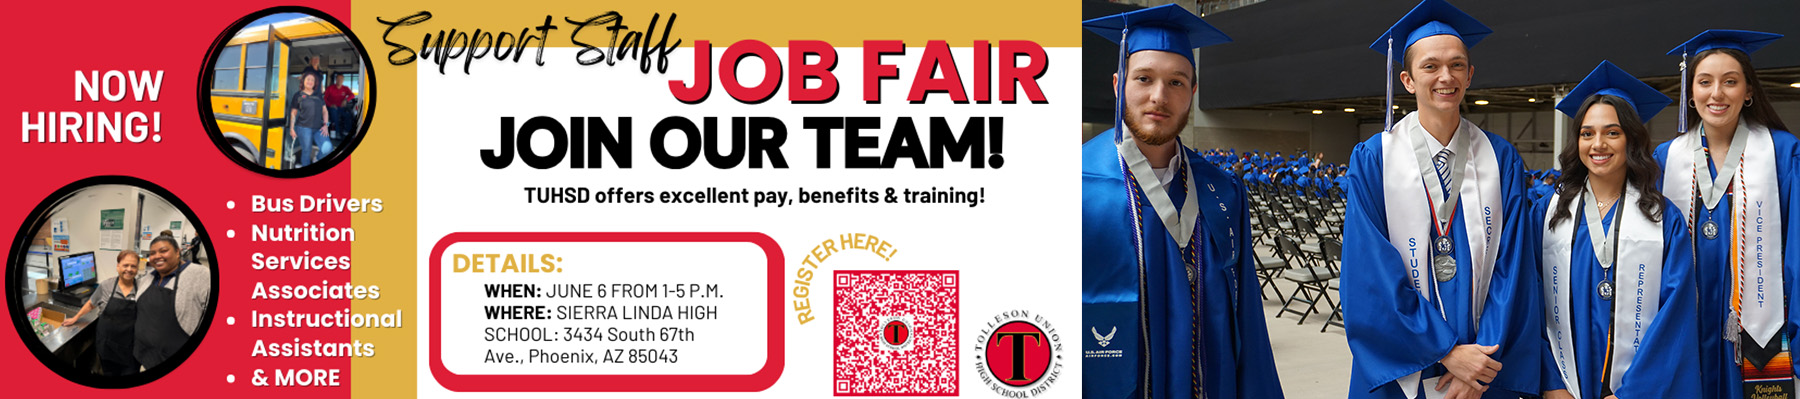 TUHSD Job Fair- we offer excellent pay, benefits, & training! Hiring bus drivers, nutrition services associates, instructional assistants & more. June 6 from 1-5 pm at Sierra Linda HS in Phoenix, AZ 85043  | Group of students in school 